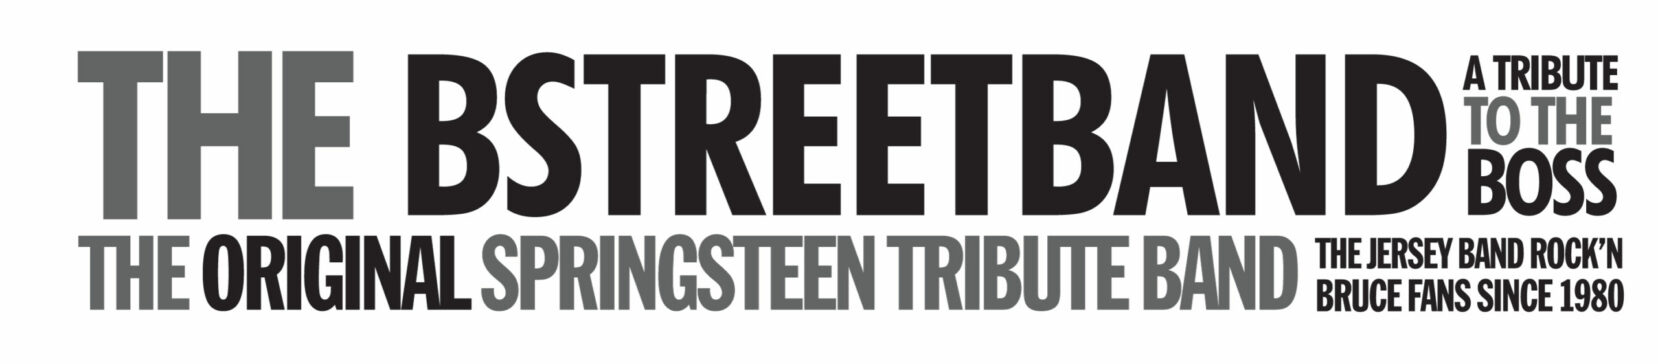 BStreetBand-logo-with-tagline